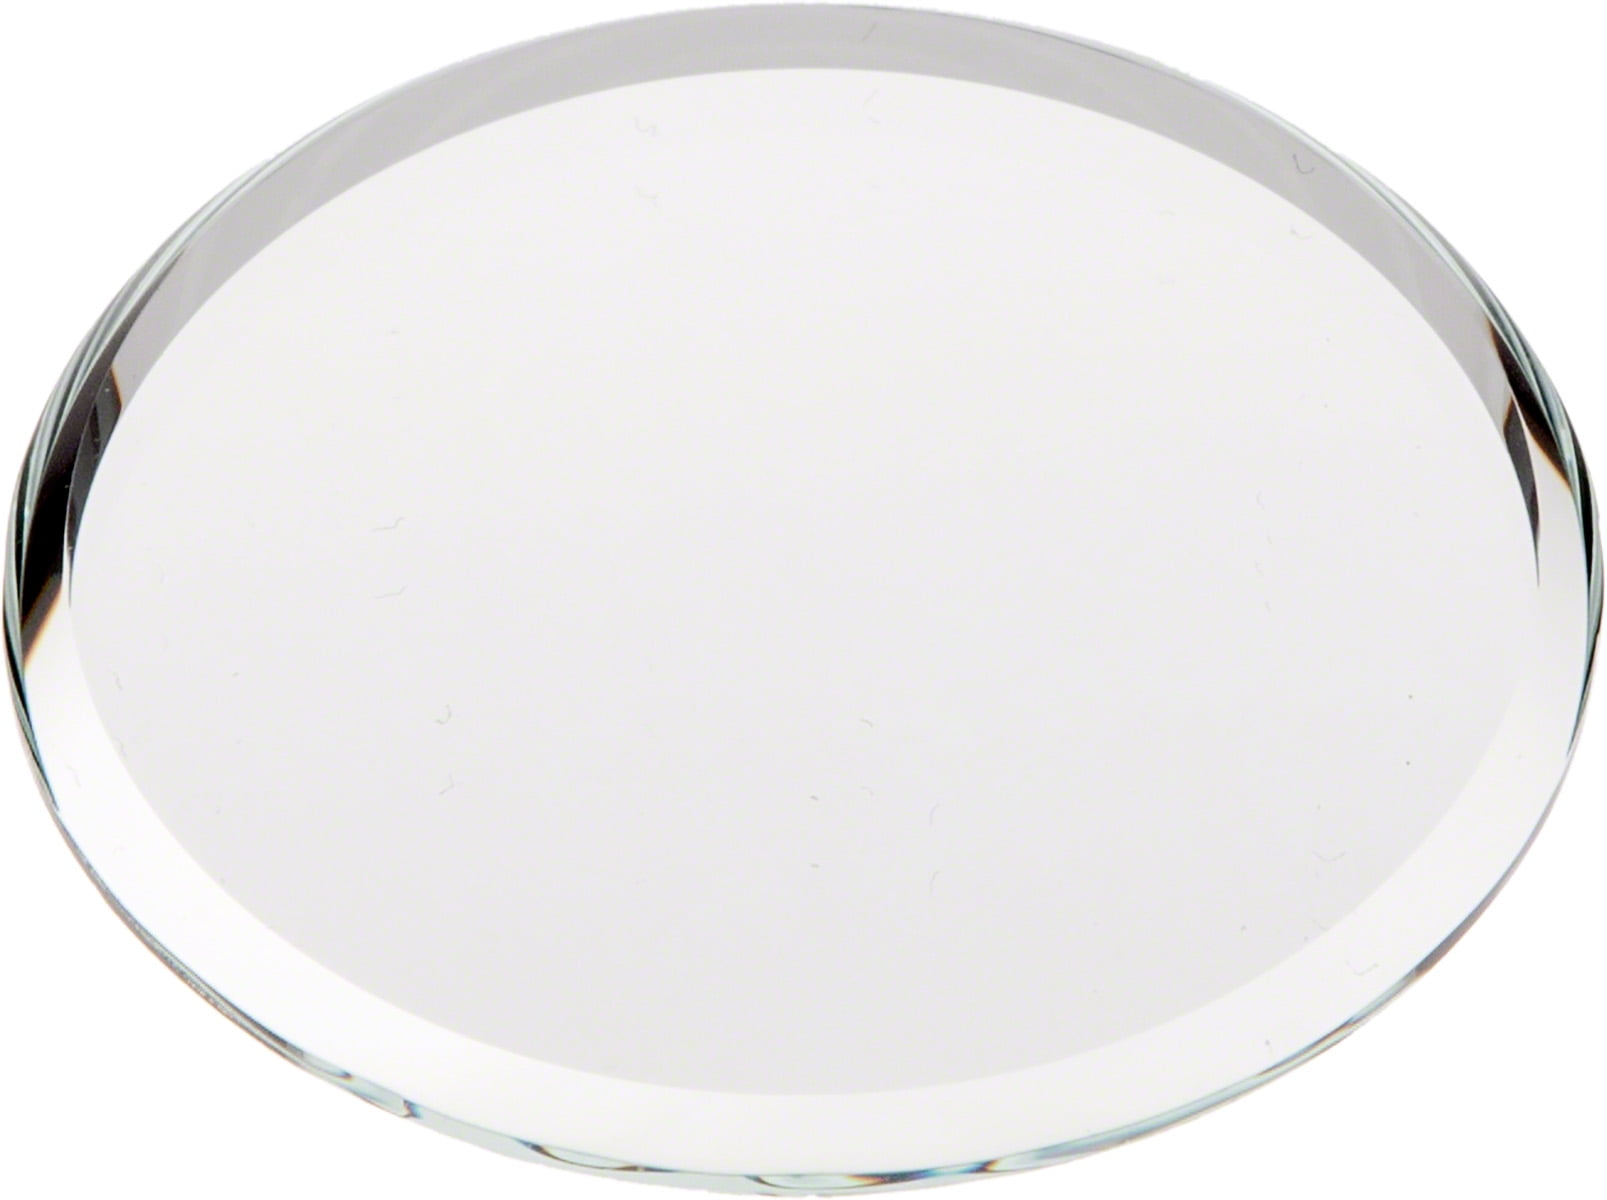 Plymor Rectangle 3mm Beveled Glass Mirror Pack of 3 5 inch x 7 inch